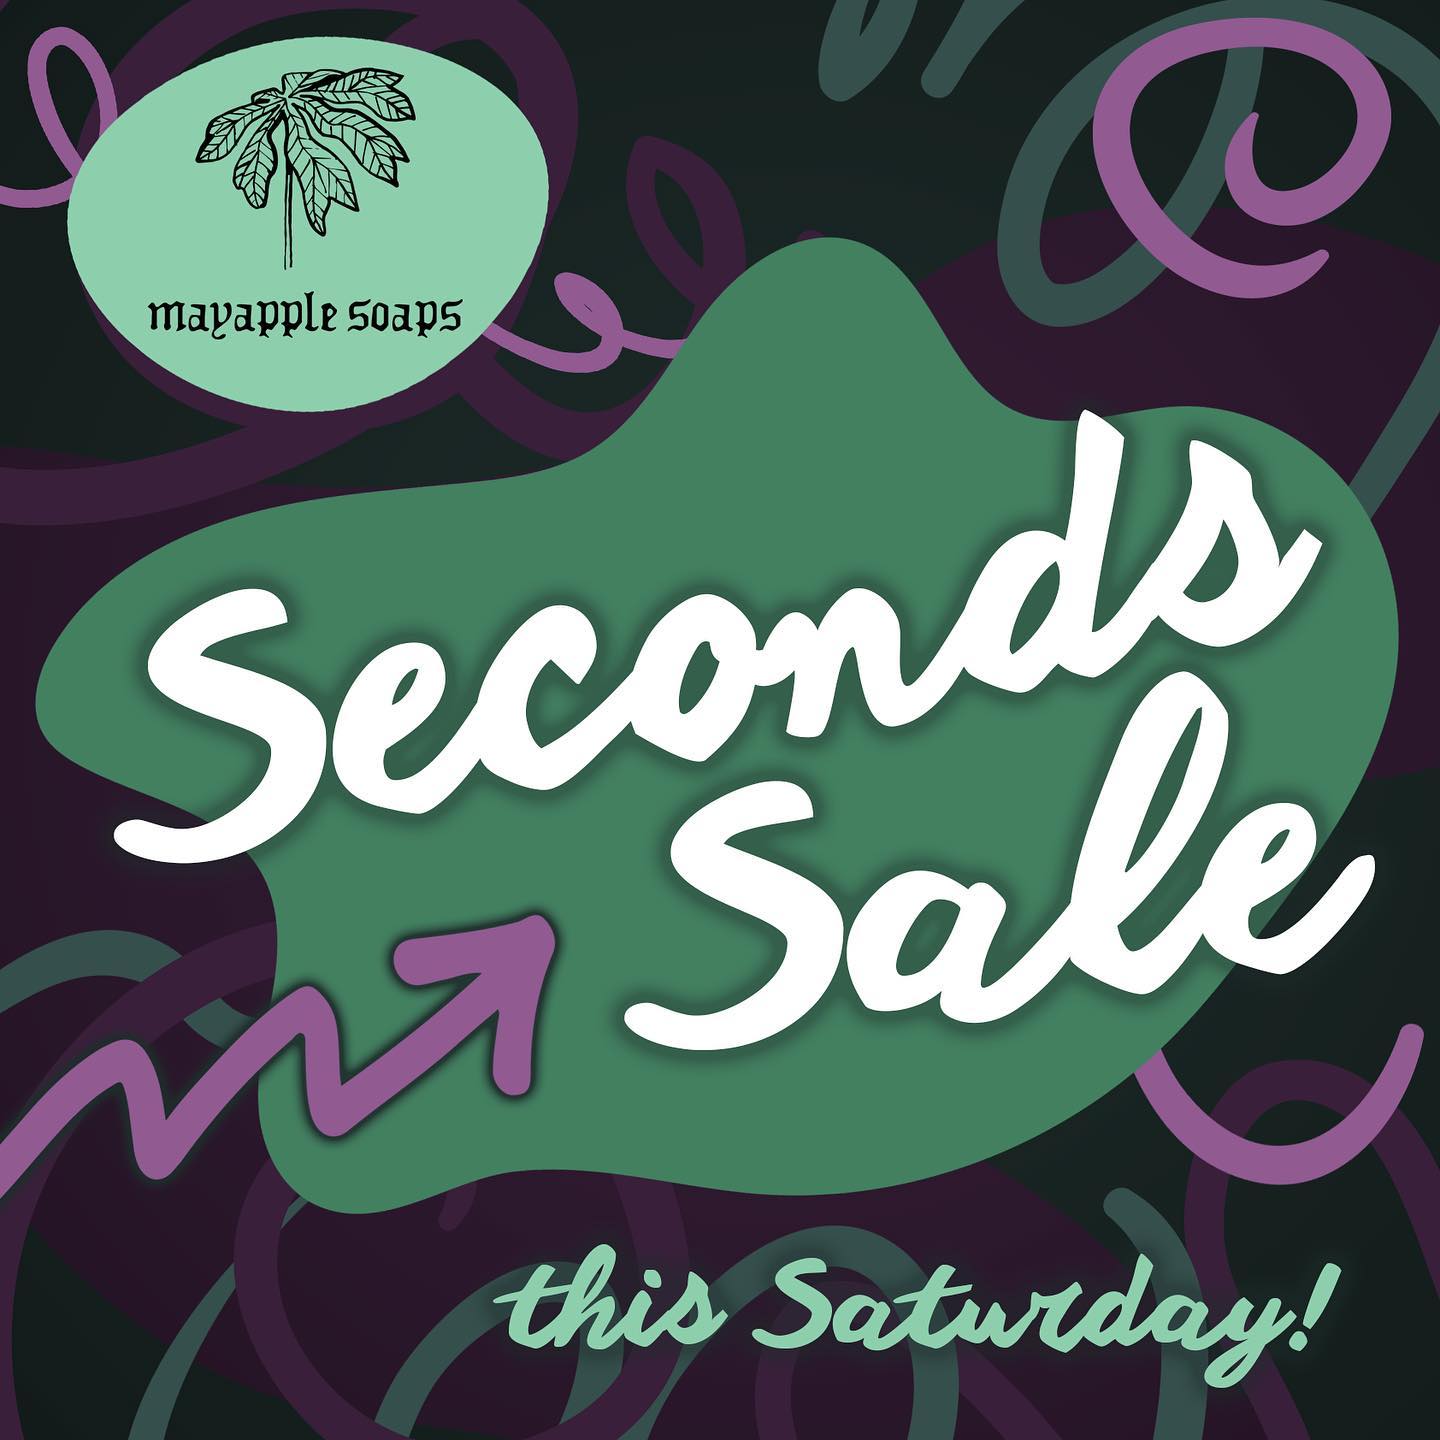 Who doesn't like a bargain? This Saturday is the Great Brookland Yard Sale, and sales are happening all across the neighborhood. You can find many deals at the Brookland Farmers Market, and not just at my table. Several studios in the Arts Walk are also offering discounts. 🎉🎉🎉

Pick up a $1 bar of Seconds Soap. What is Seconds Soap? It's rebatched from all the soap scraps that pile up in my workshop. I shred, melt, and repour all the flopped batches of soap, adding organic coconut milk and organic essential oils. The best part is, Seconds Soap is packed with all of the skin-loving ingredients you find in my other soaps, and available for a fraction of the price!

Be sure to bring a cart for all the treasures you'll find around the neighborhood. Visit GreatBrooklandYardSale.com to see the map of all the sale locations, or pick up a paper map Saturday morning at Atlantic Electric, 3726 10th St NE.

#brookland #brooklanddc #destinationdc #dmvblogger #dcblogger #dcyardsale #walkwithlocalsdc #washingtondc #shopdc #yelpdc #theotherdc #popville #mydccool #exploredc #igersdc #dcist #onlyindc #freeindc #goatmilksoap #bythingsdc #madeindc #monroestreetmarket #artswalkdc #dcmarkets #thingstododc #dcdeals